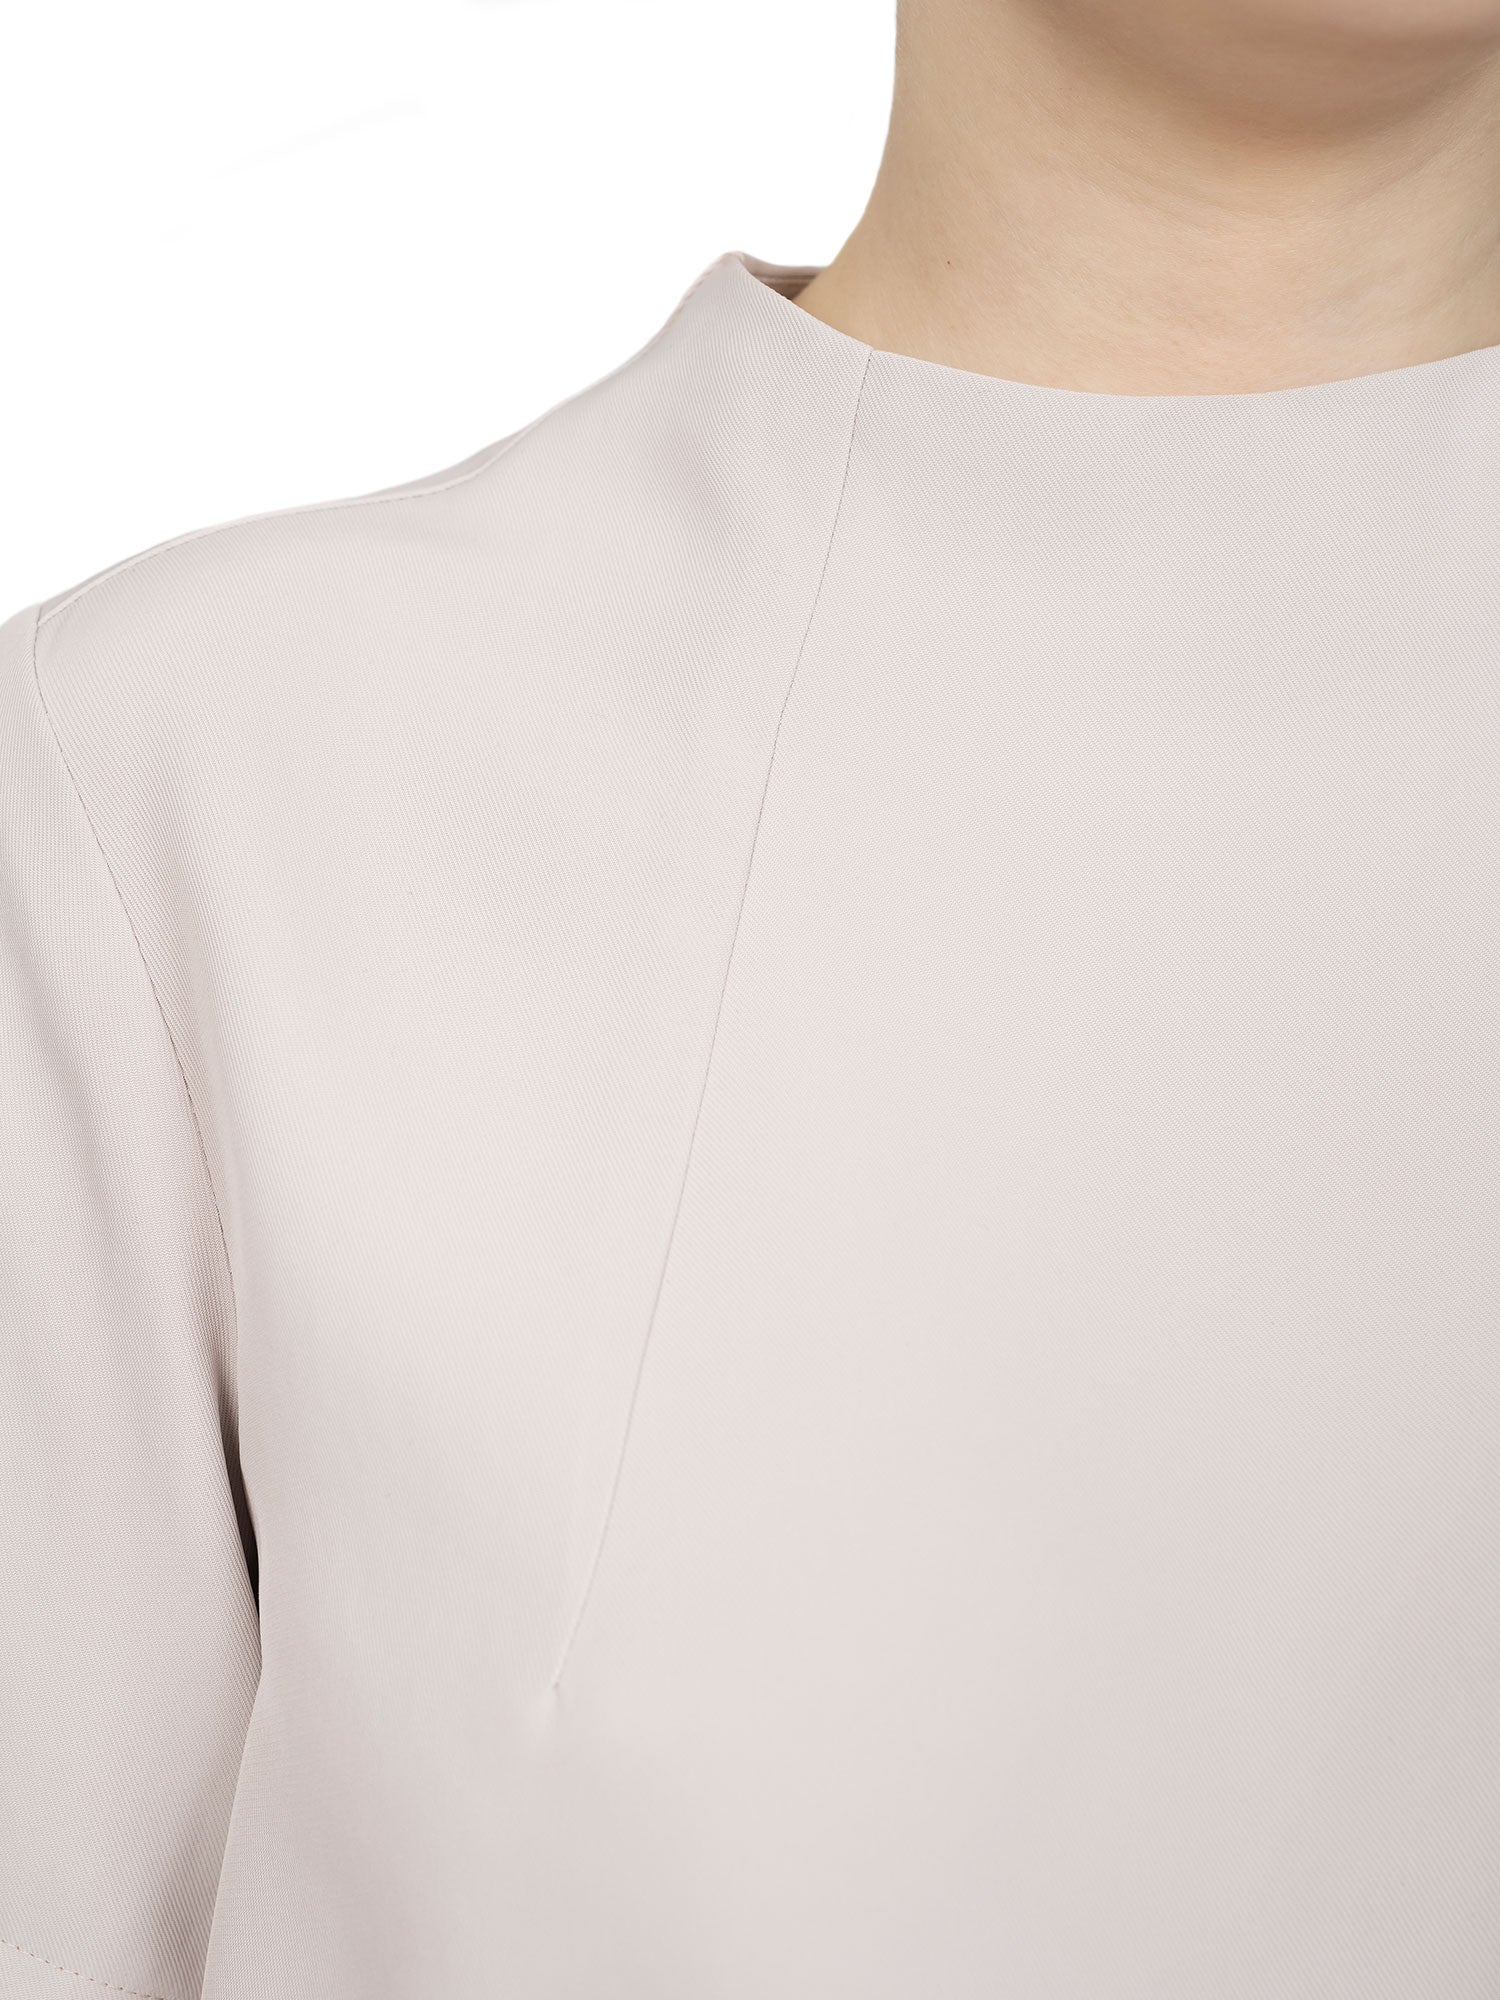 The Assembly Line Funnel Neck Top